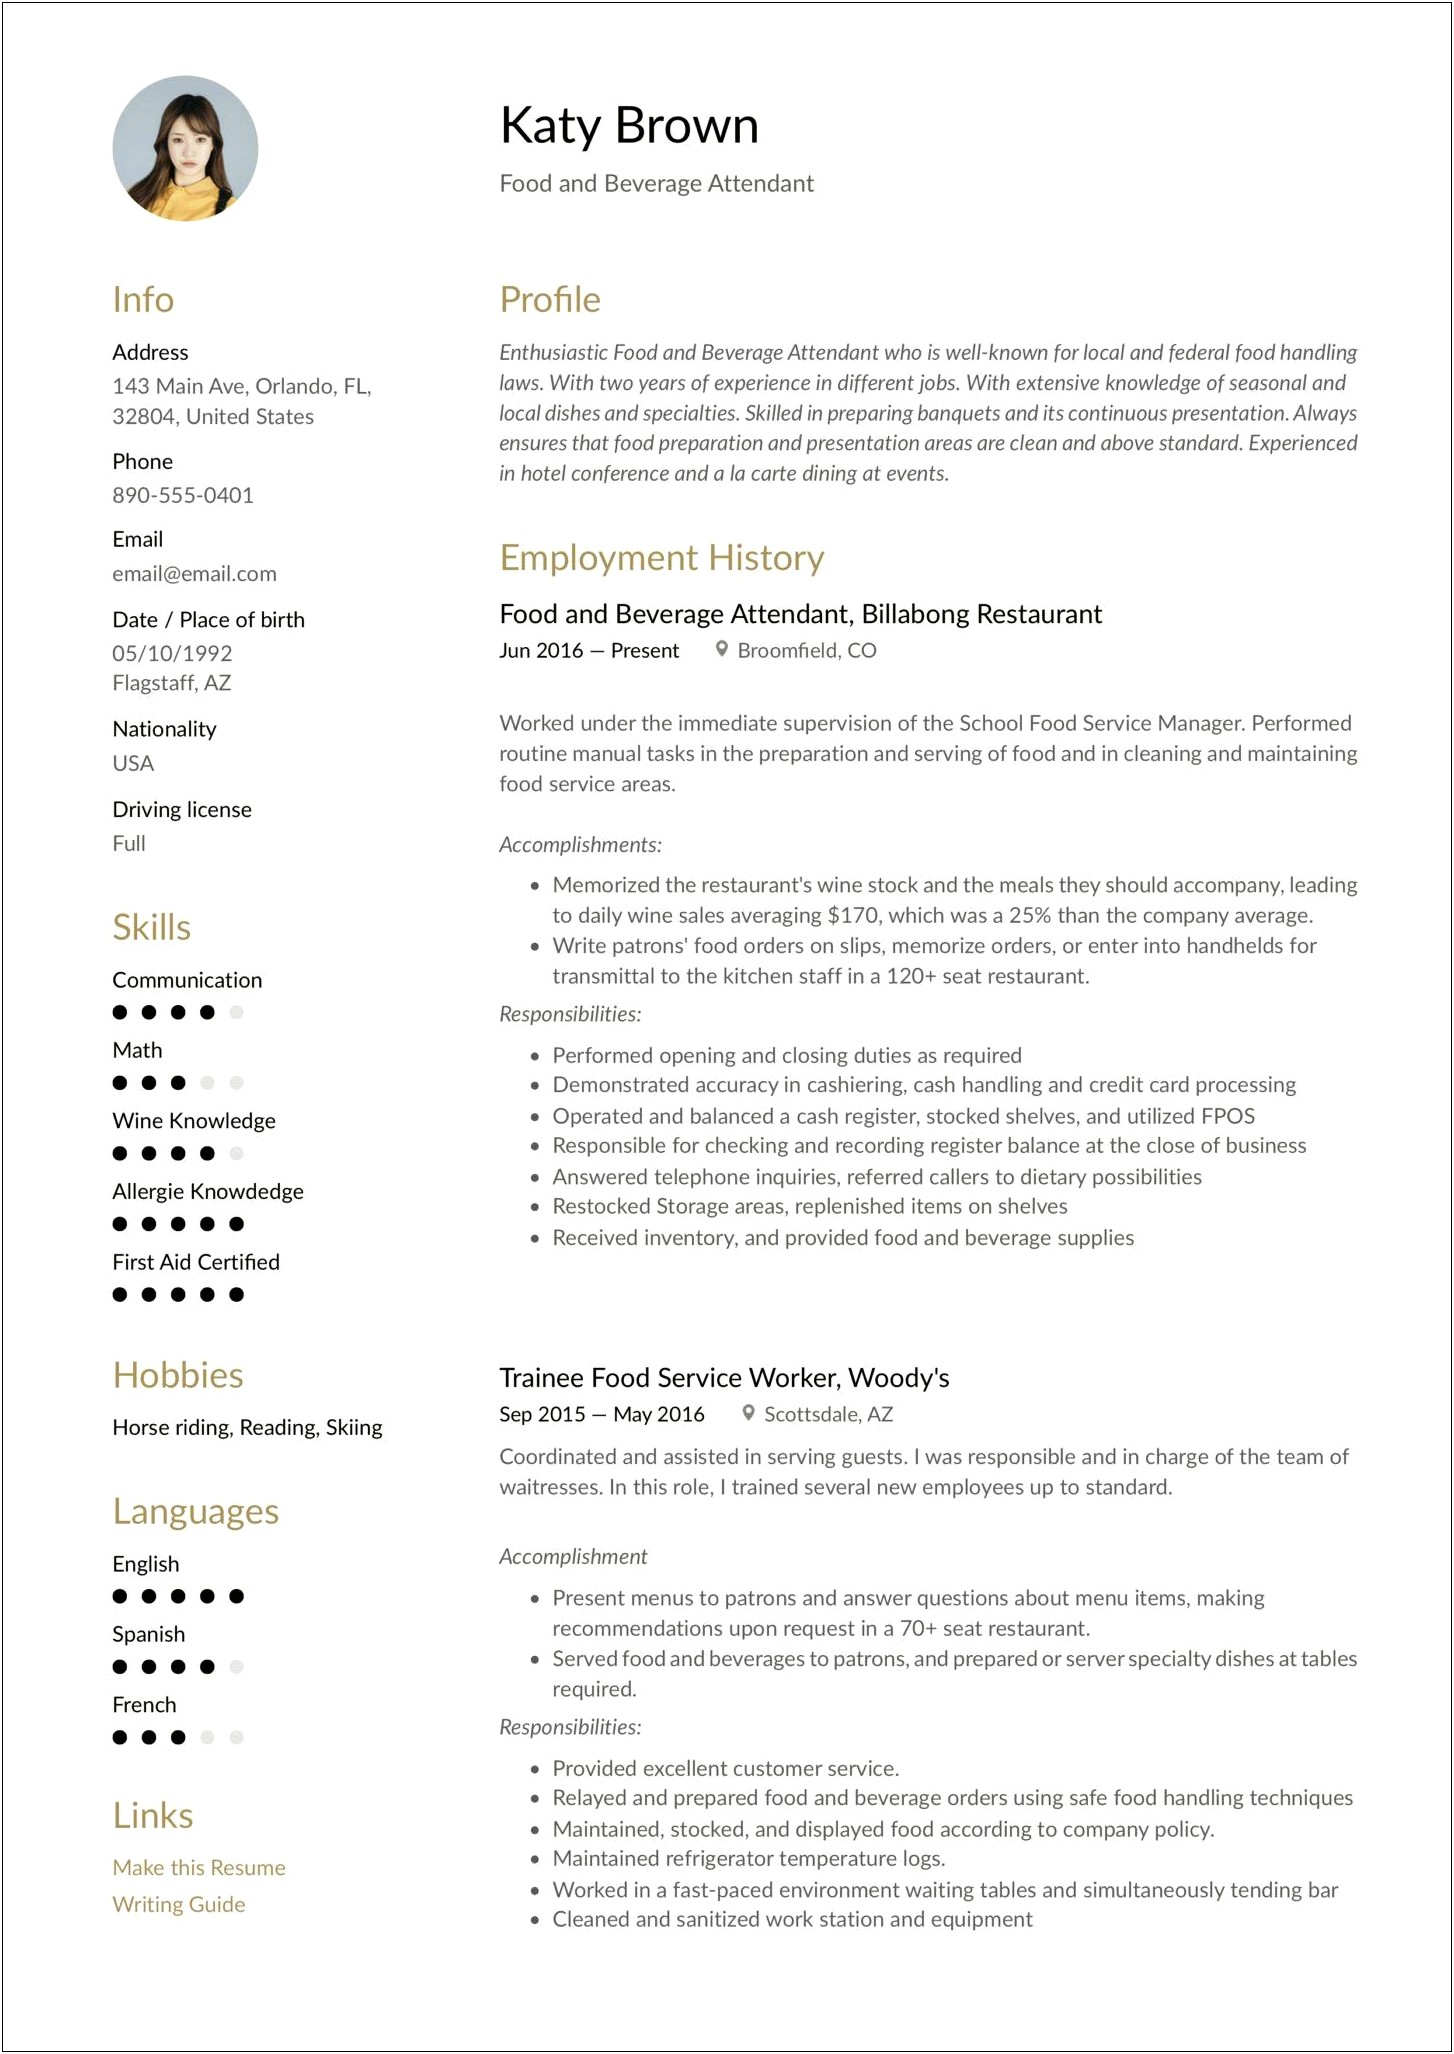 Resume Sample For Food And Beverage Service